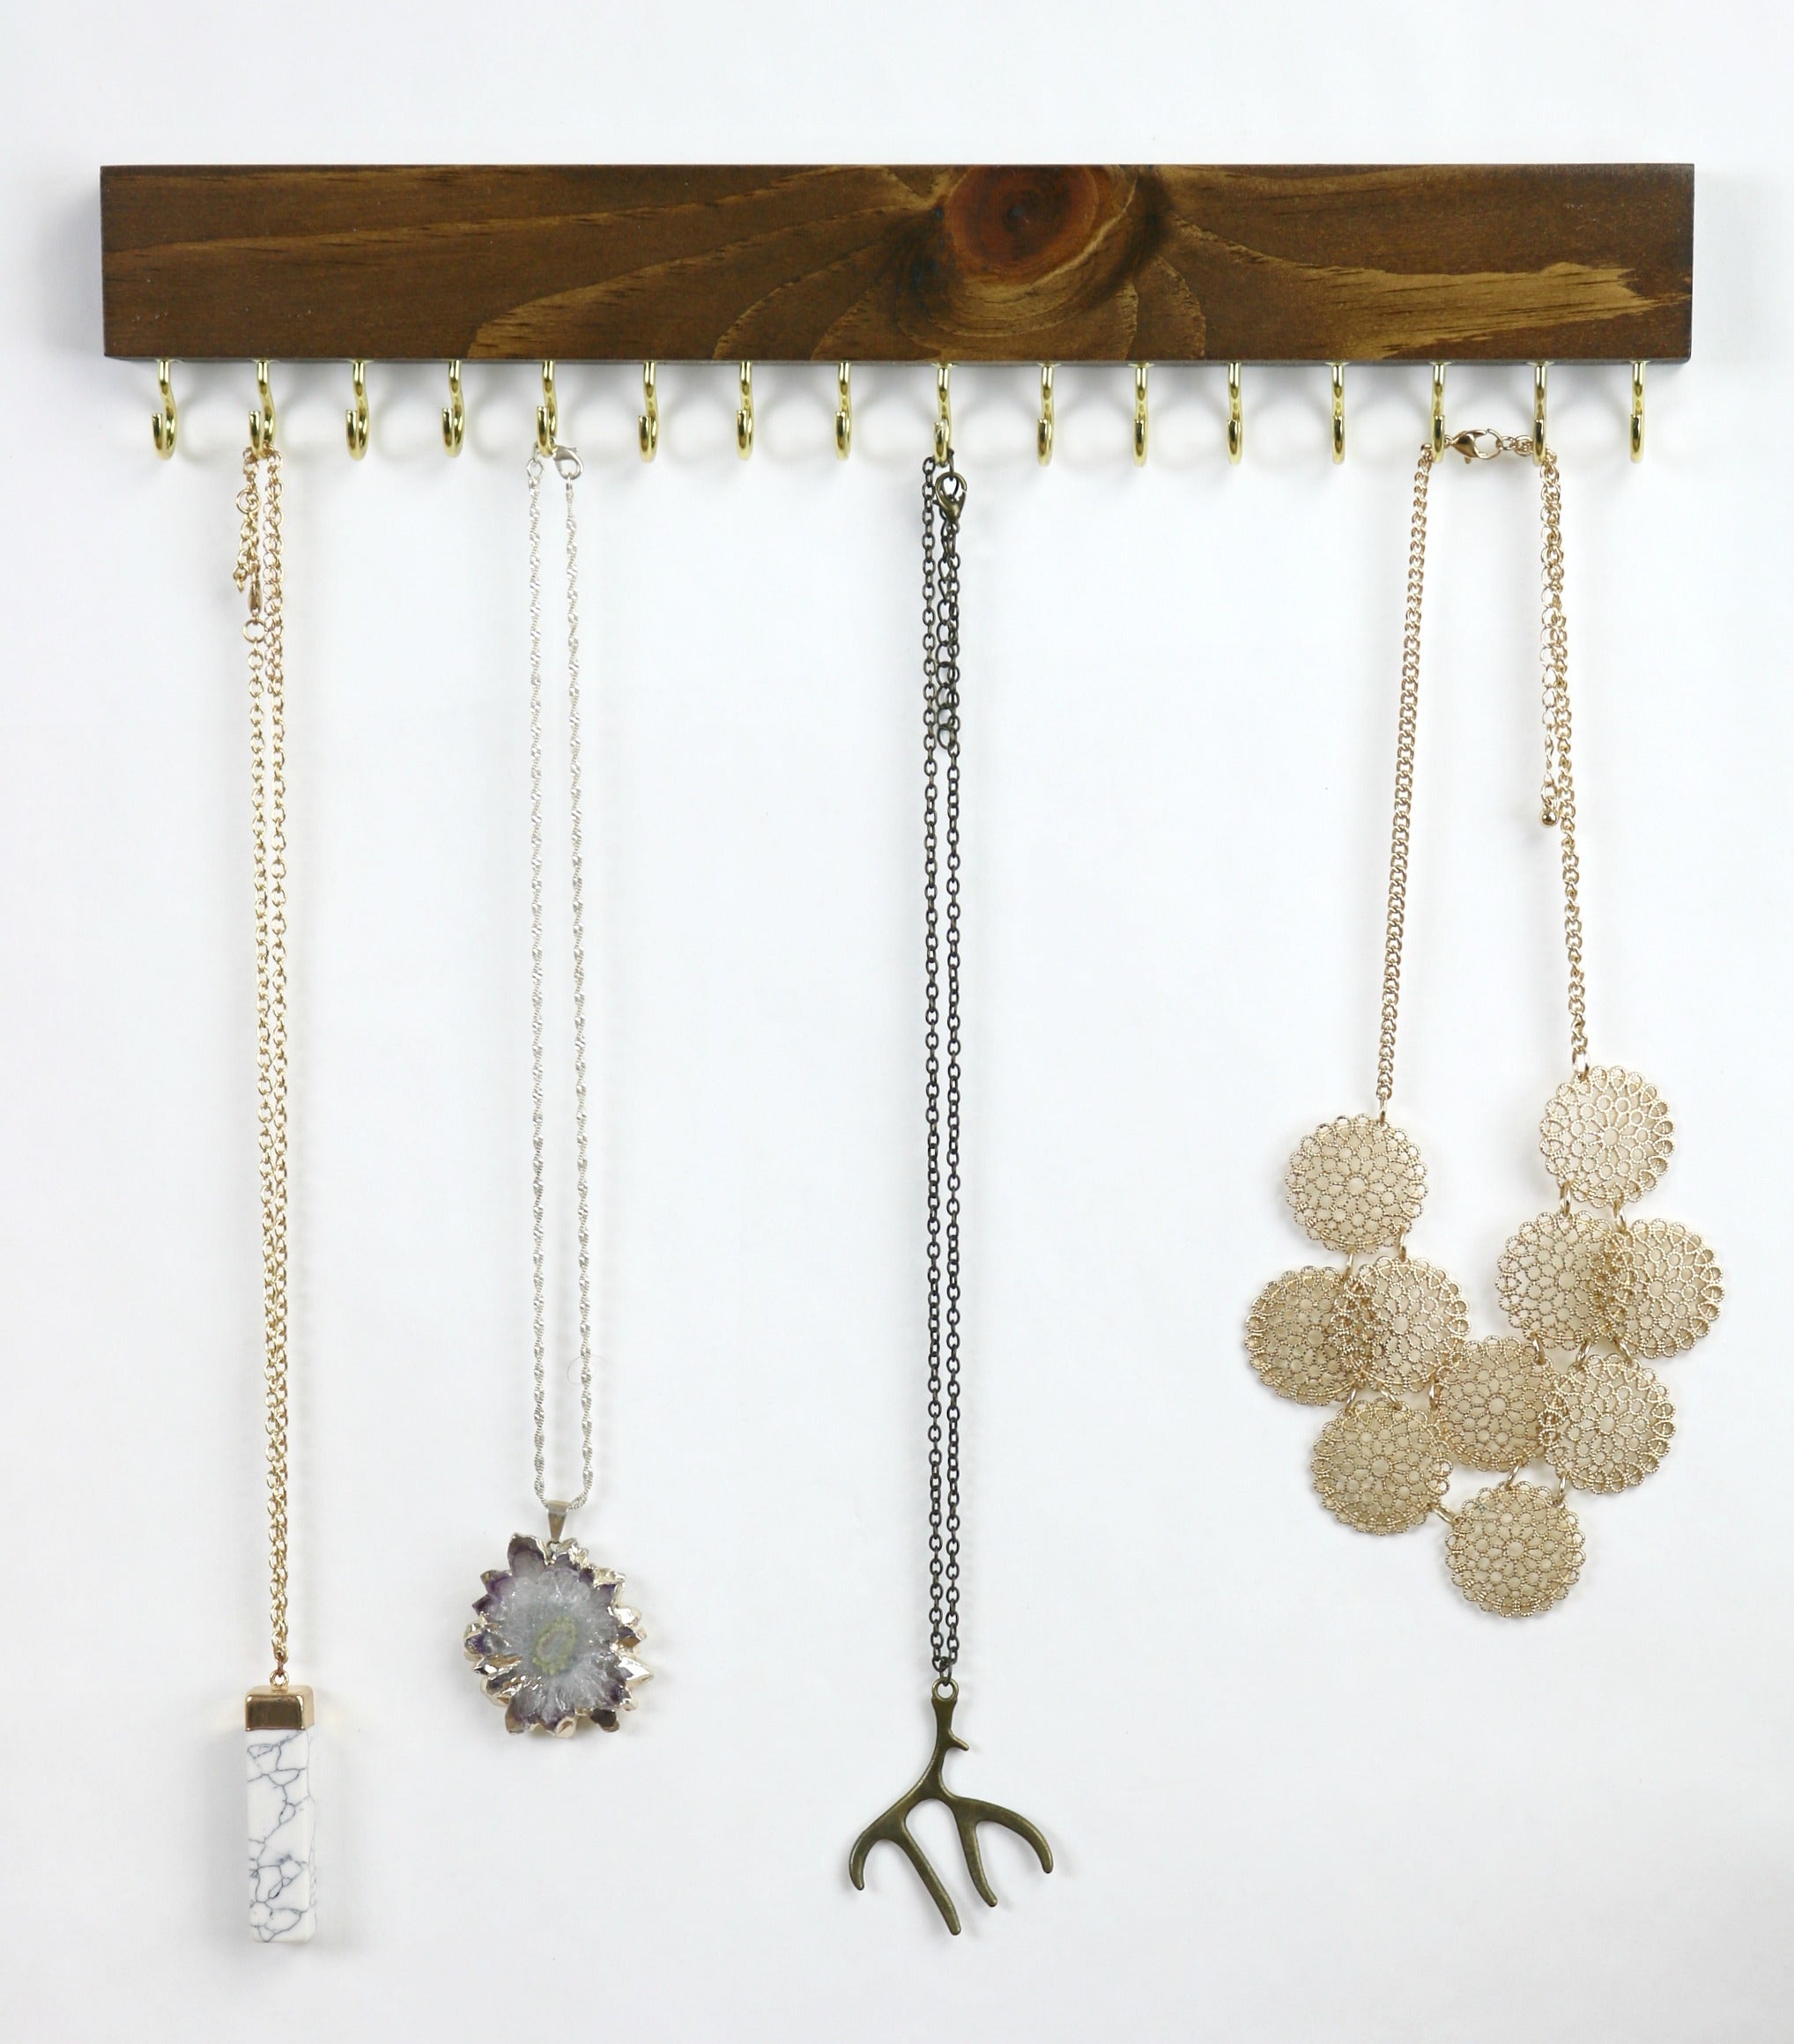 DIY NECKLACE HANGER, HOW TO